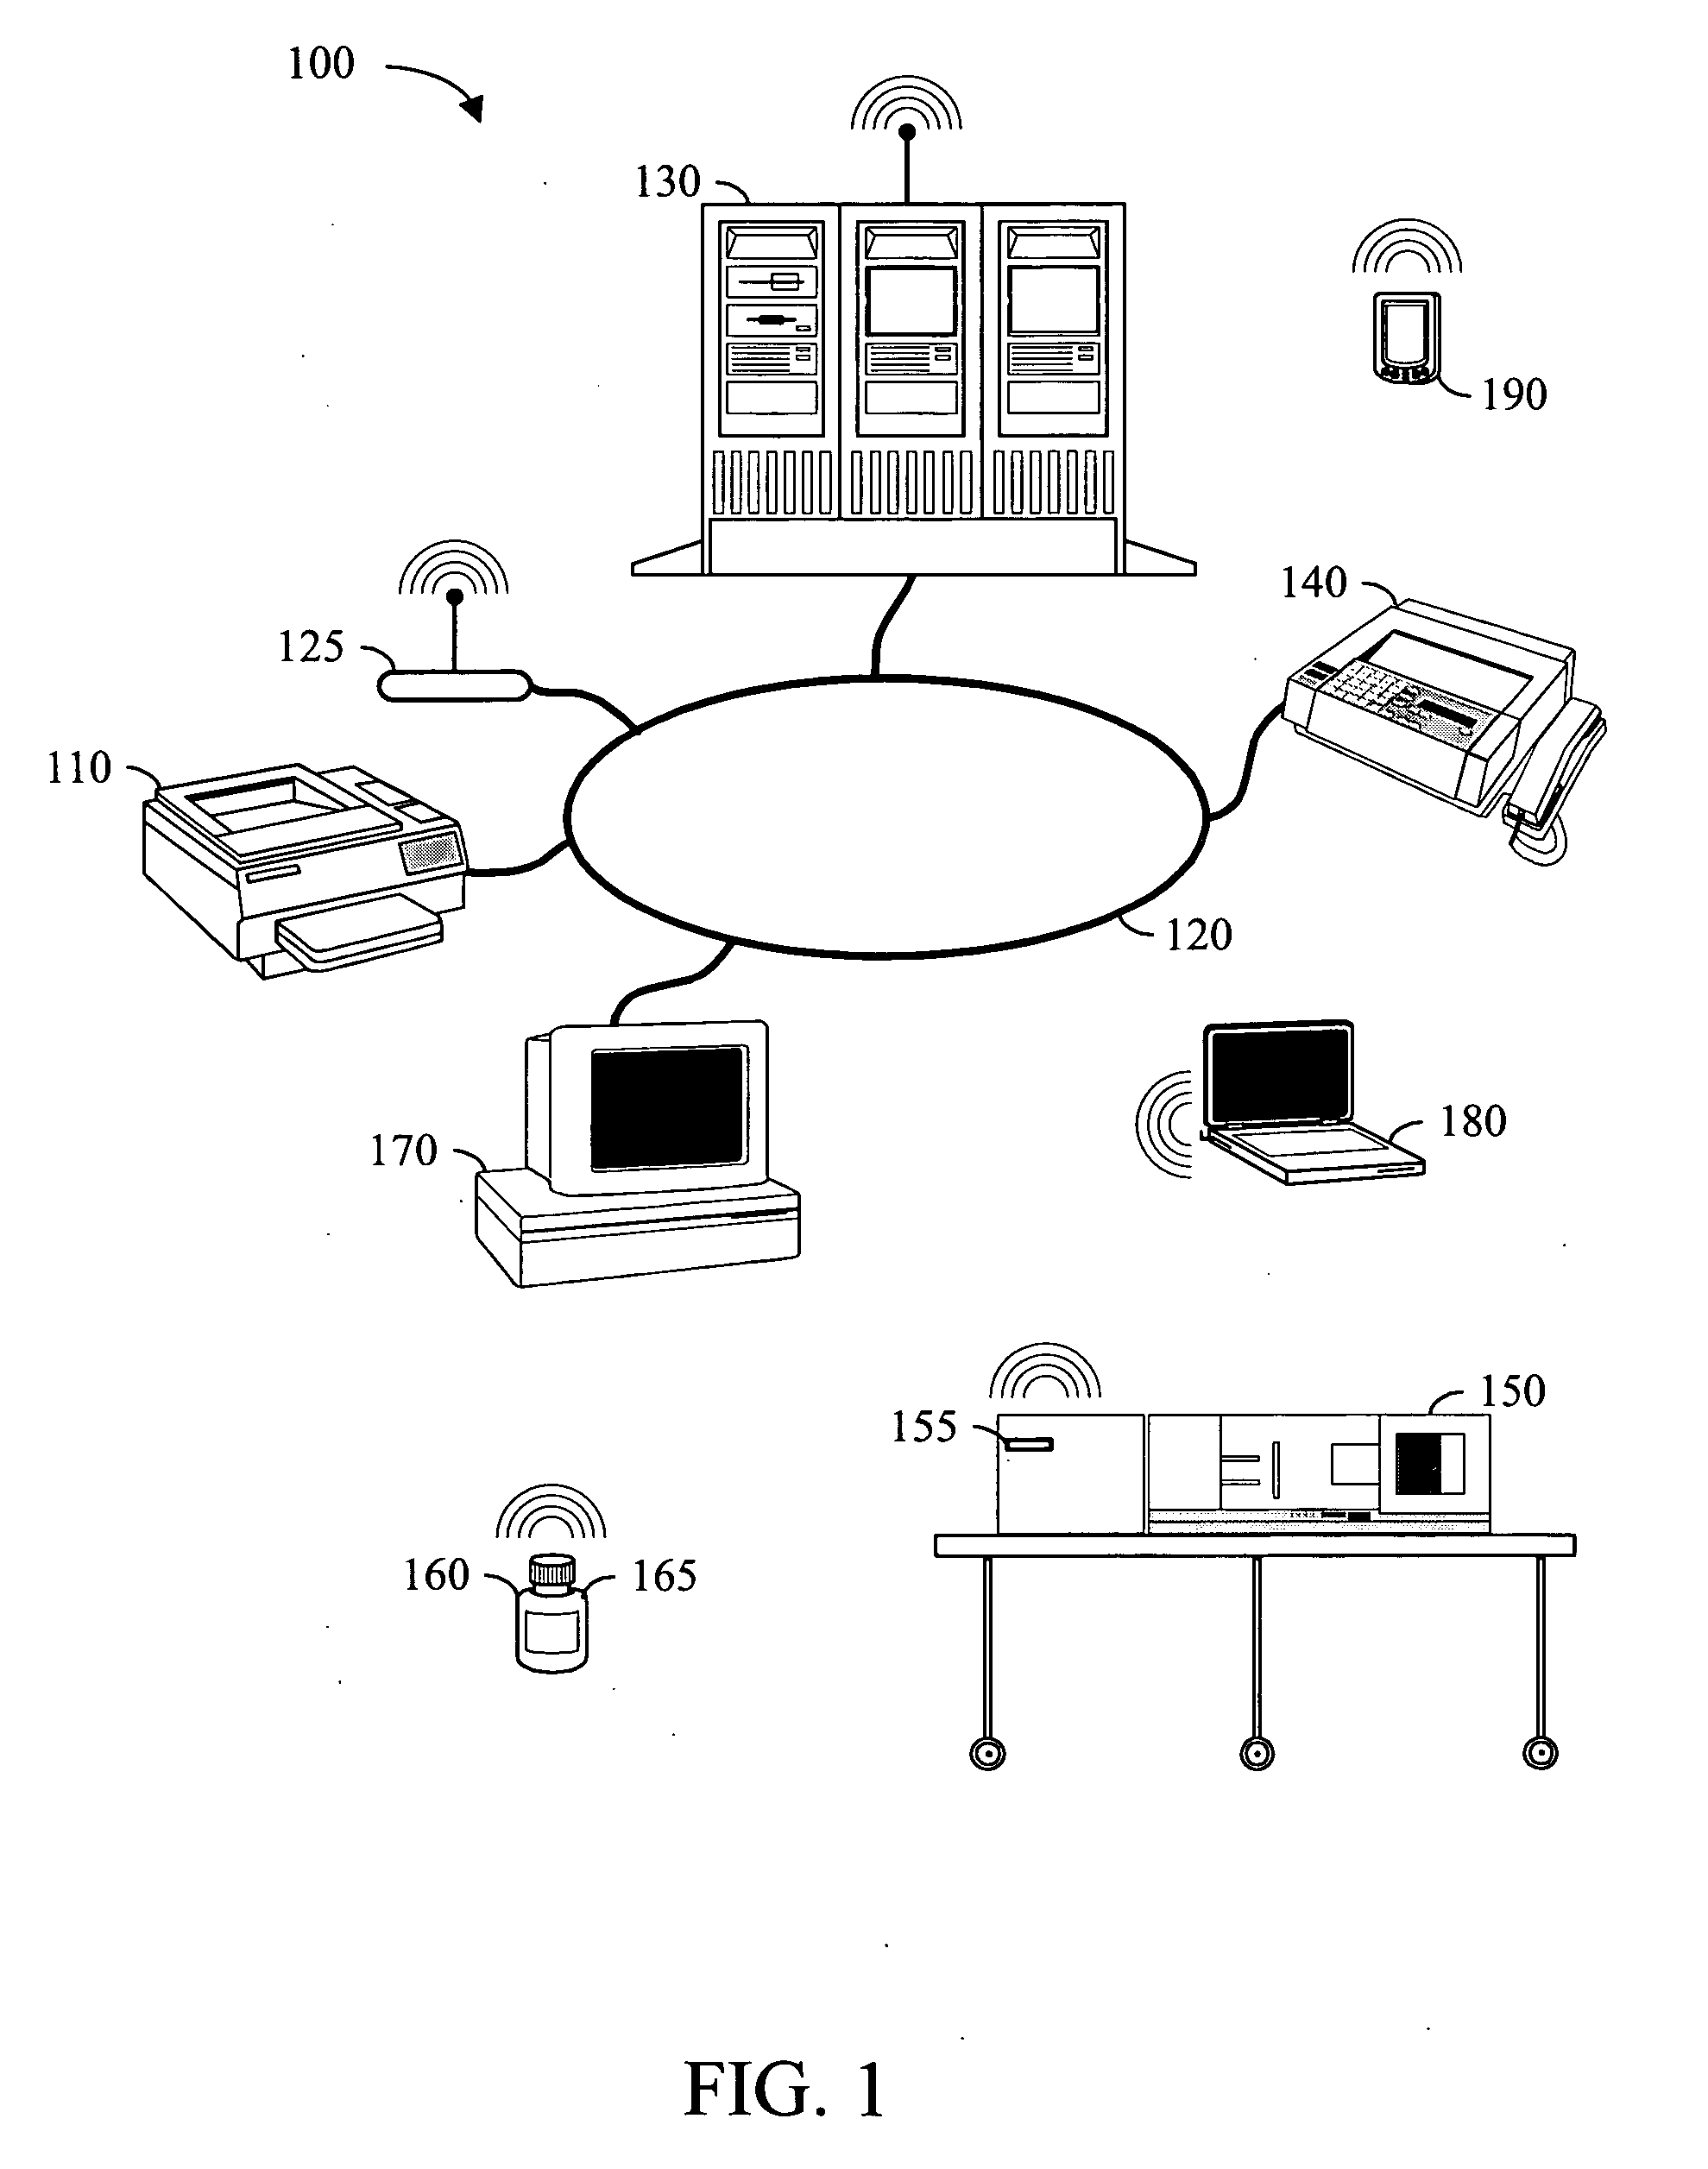 Apparatus and method for integrated healthcare management